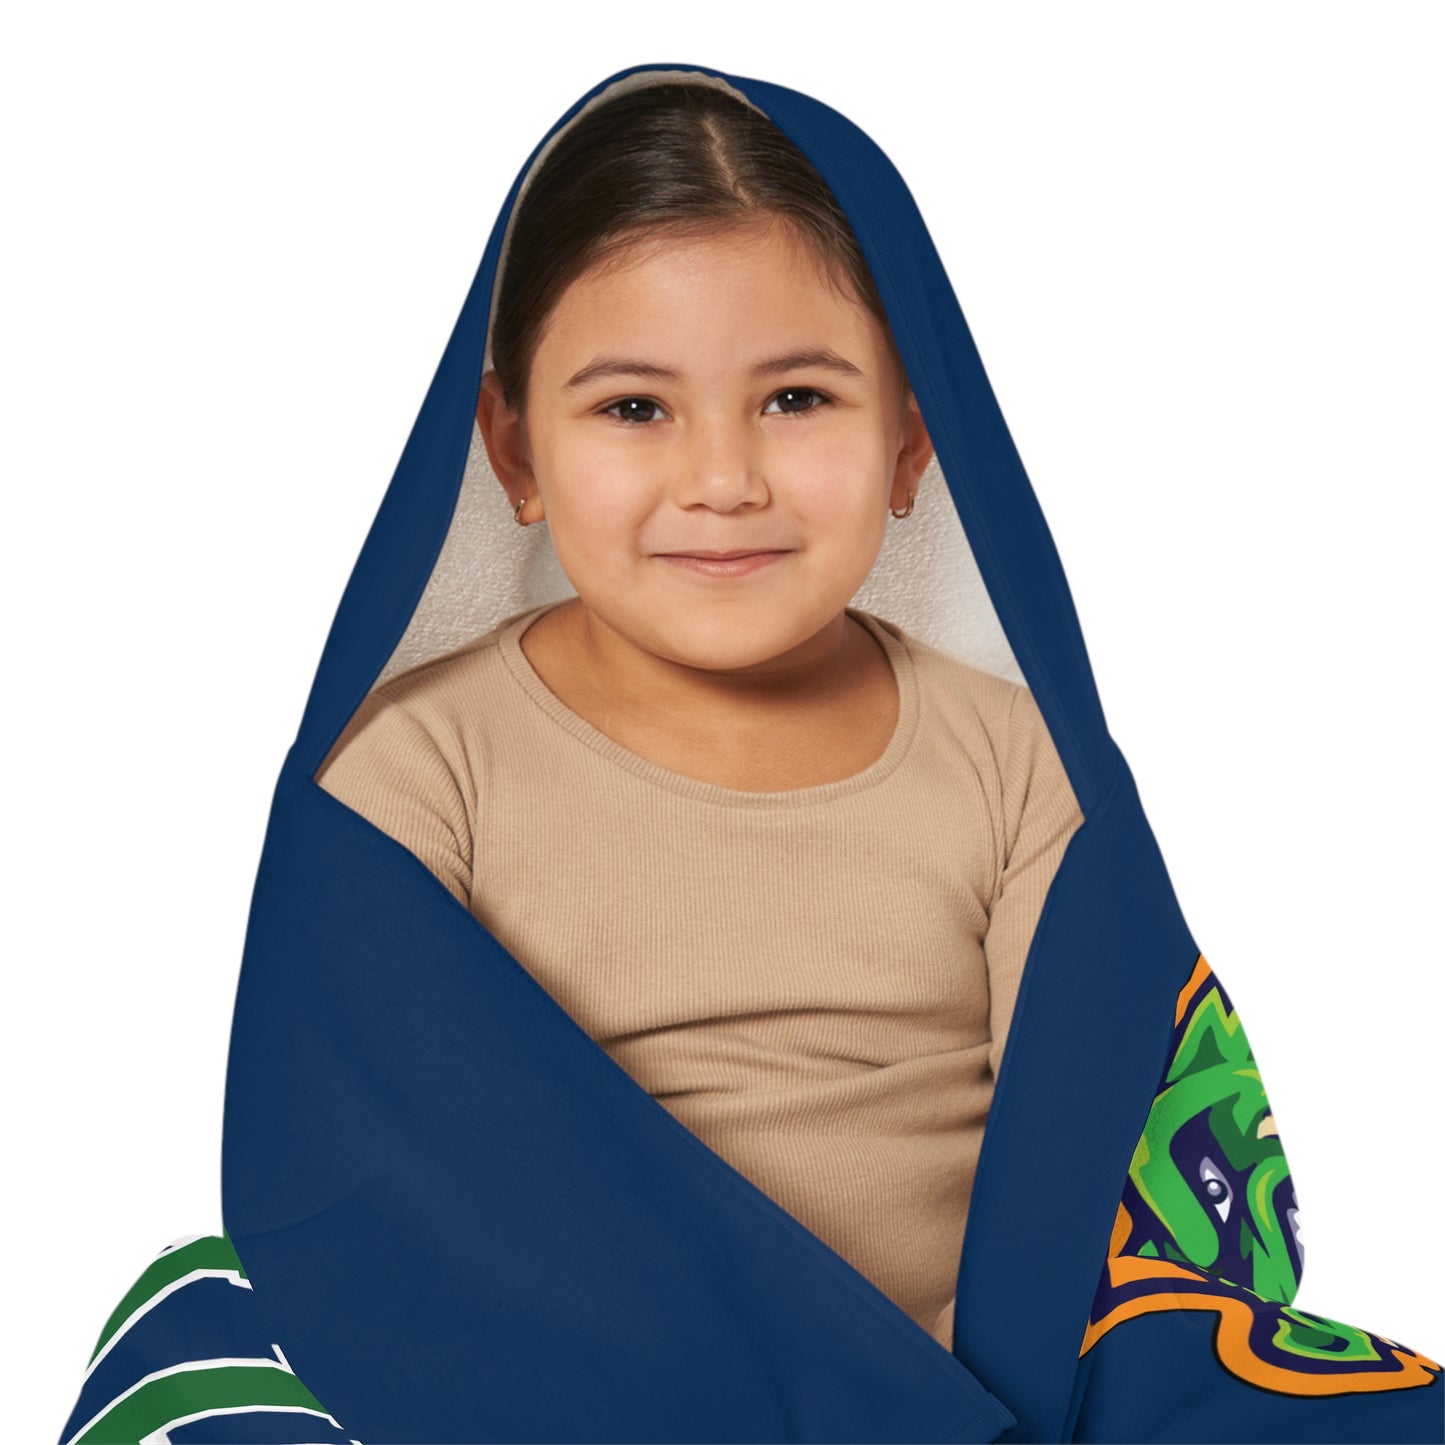 Gators Personalized Youth Hooded Towel